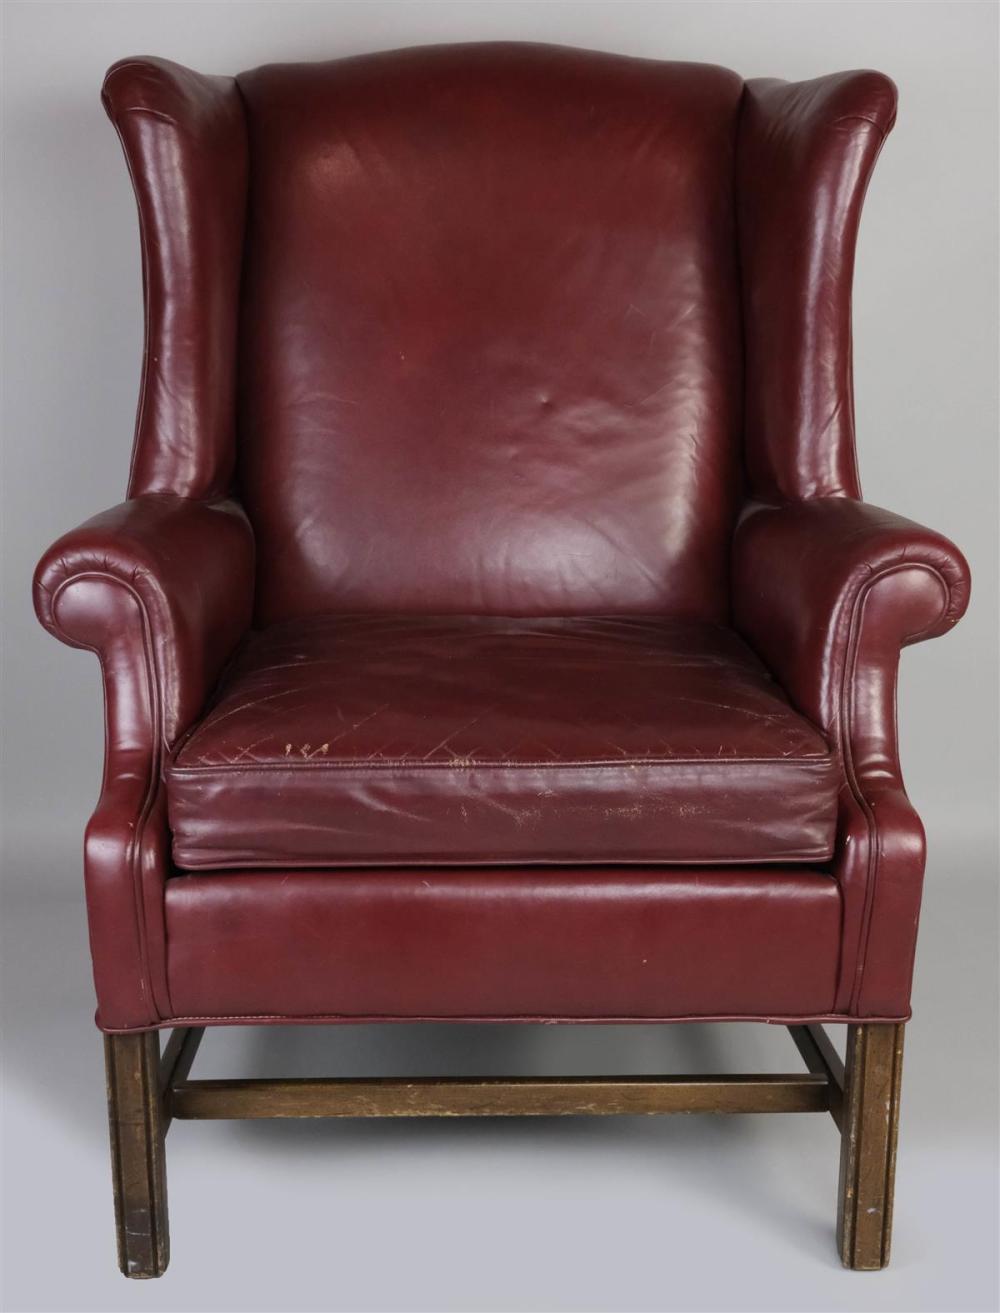 GEORGE III STYLE RED LEATHER WING